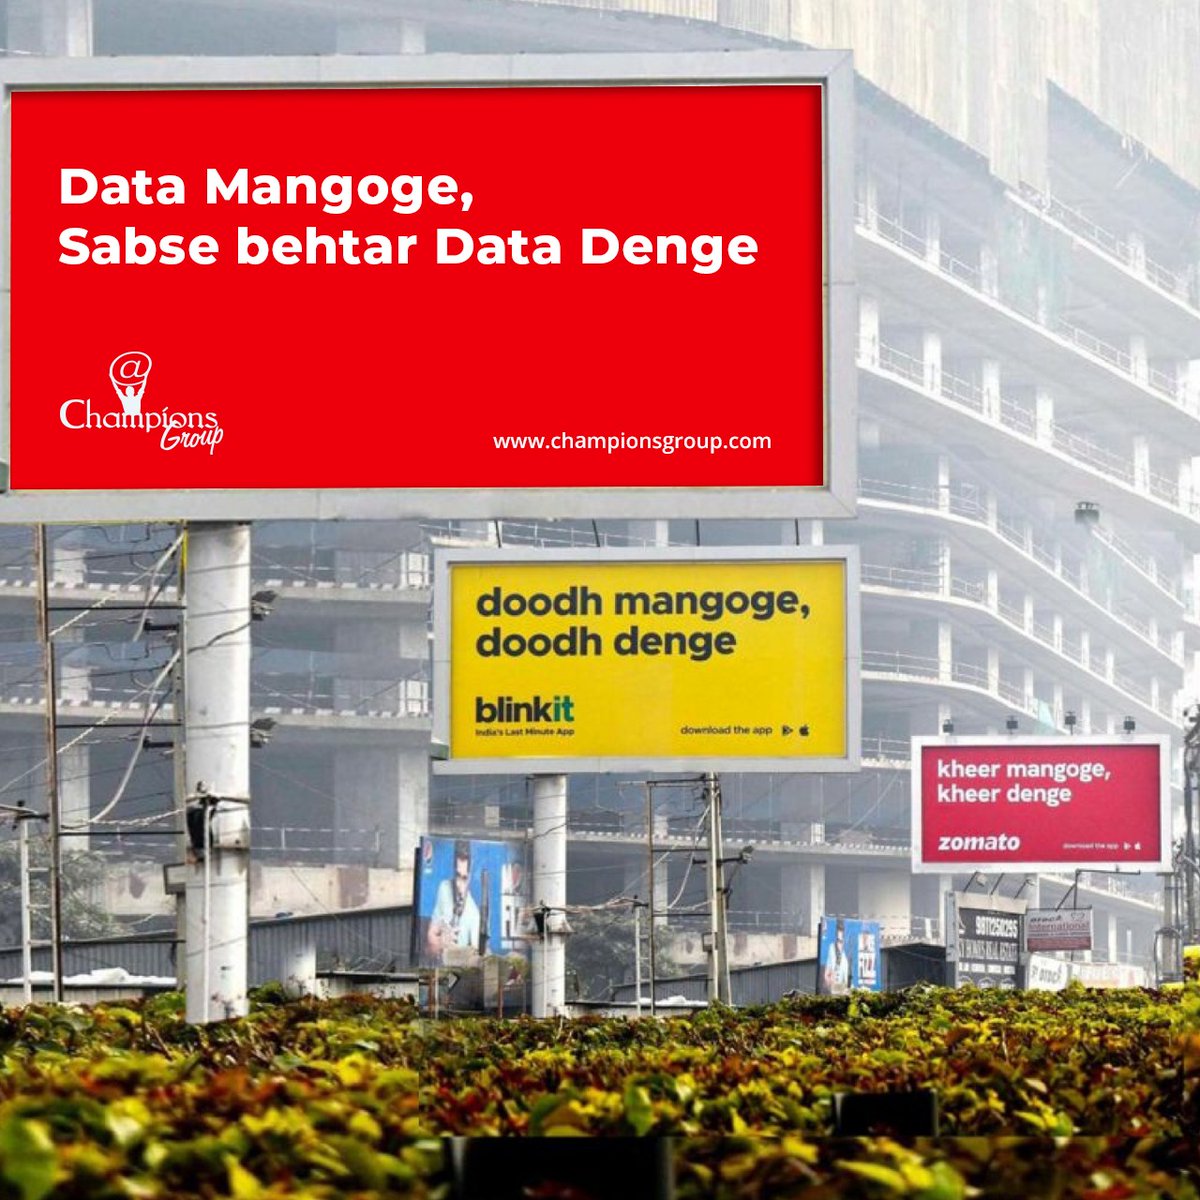 Data Mangoge, Sabse Behtar Data Denge. The best data across the industry and more, that's what we offer to enable your growth. bit.ly/3IYv6lE #Data #EnablingGrowth #DoubleUp #ChampionsGroup #MomentMarketing #Blinkit #Zomato #Trending  #TrendingTopic #TrendingMeme